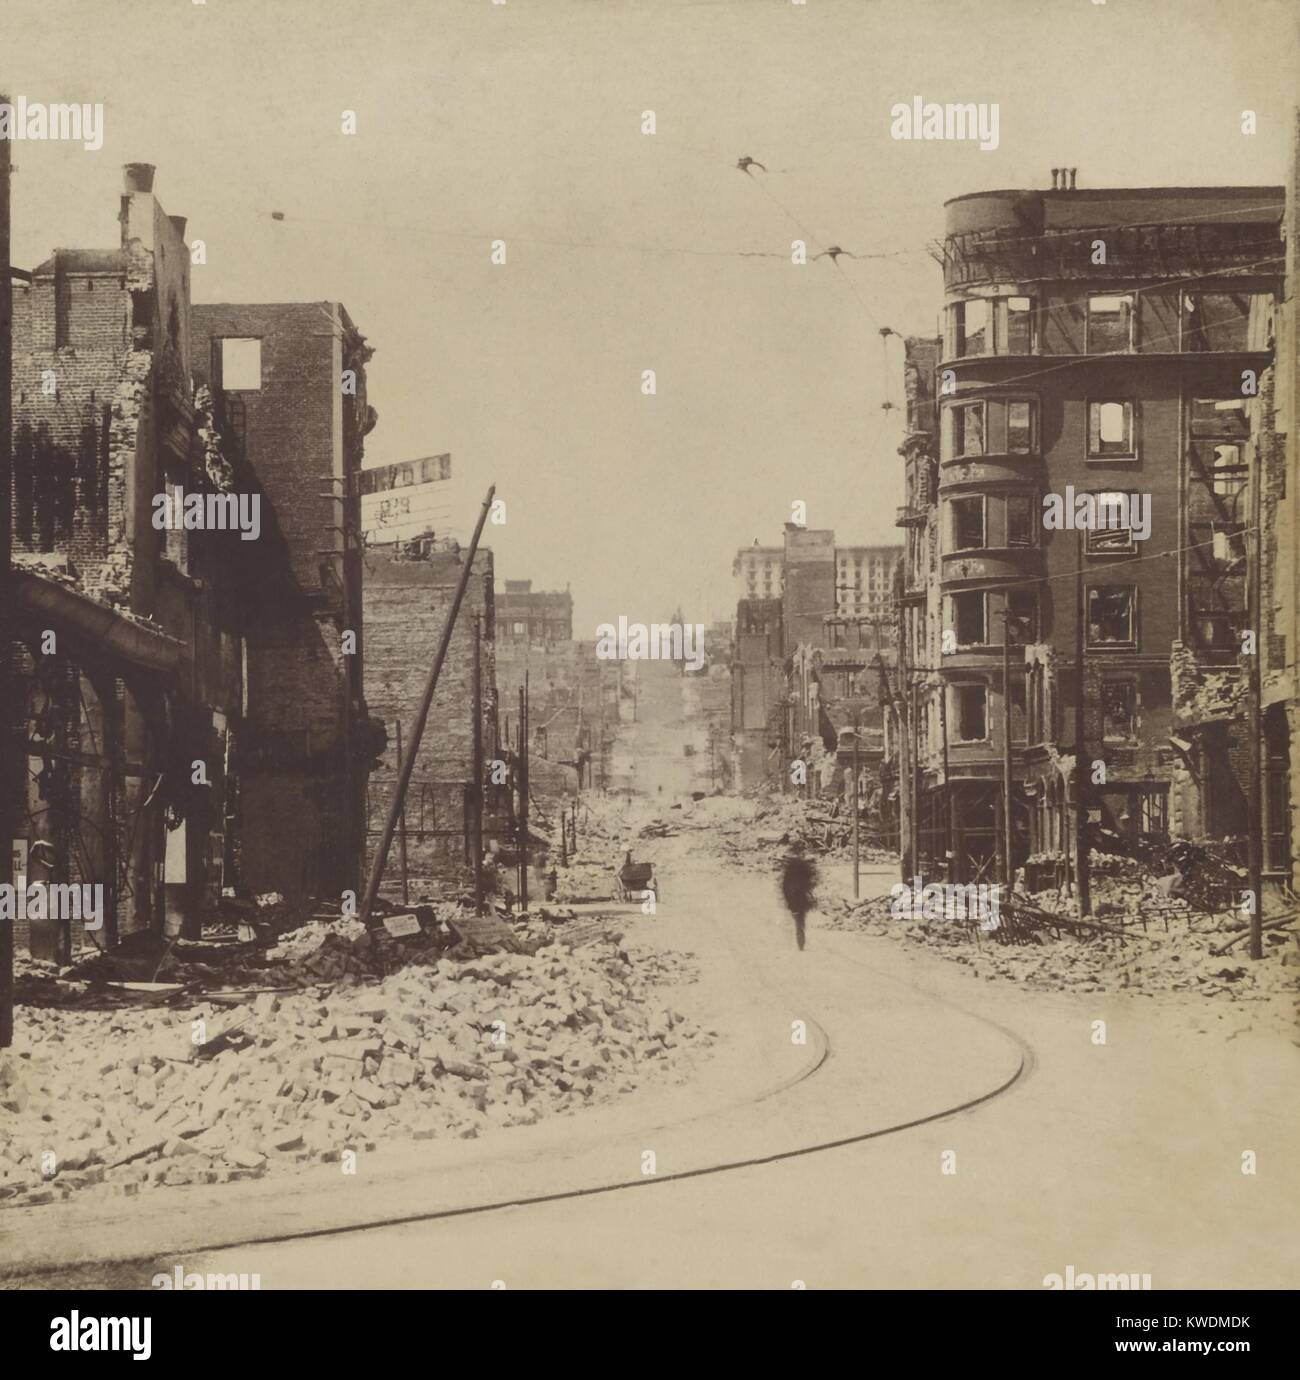 A man walks on Mason St. after the April 18, 1906, San Francisco earthquake and fire. The photo taken from Market St. shows rubble from destroyed and damaged buildings (BSLOC 2017 17 24) Stock Photo